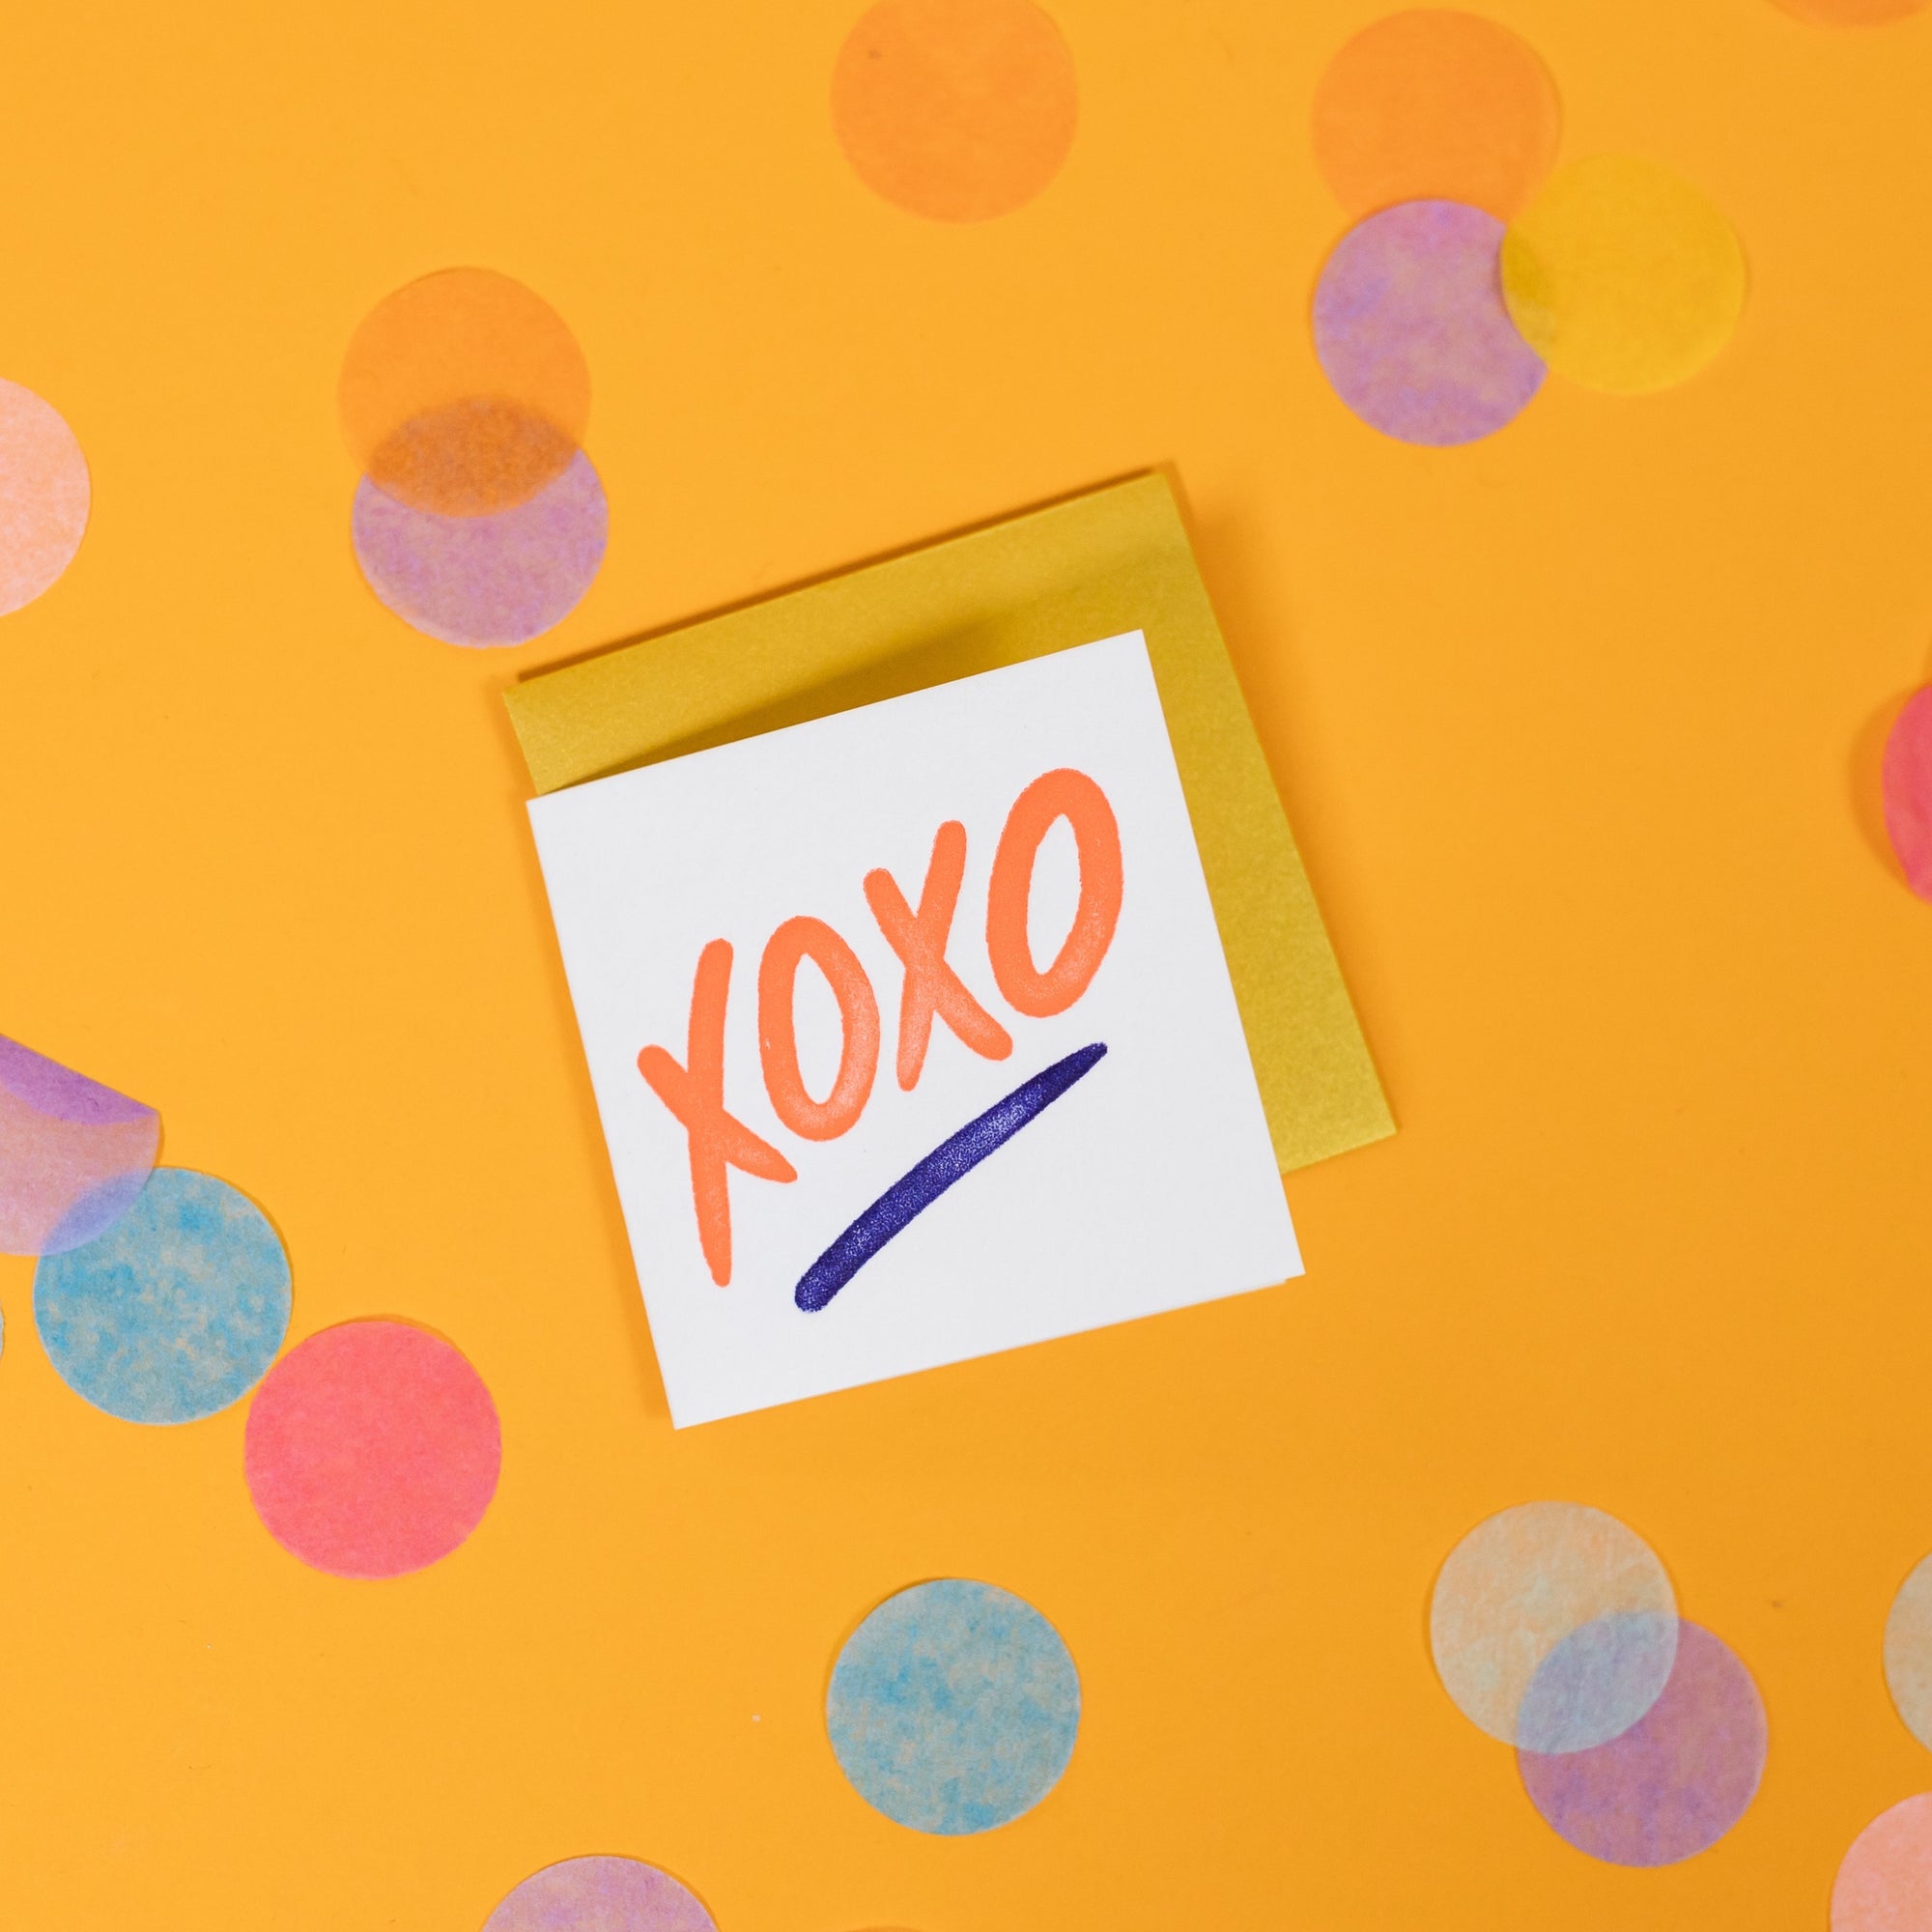 On a sunny mustard background is a mini greeting card and envelope surrounded by big, colorful confetti. The white mini card says "XOXO" in a coral orange handwritten marker lettering in letterpress with a purple underline. The envelope is a gold color. 2.5"x2.5"